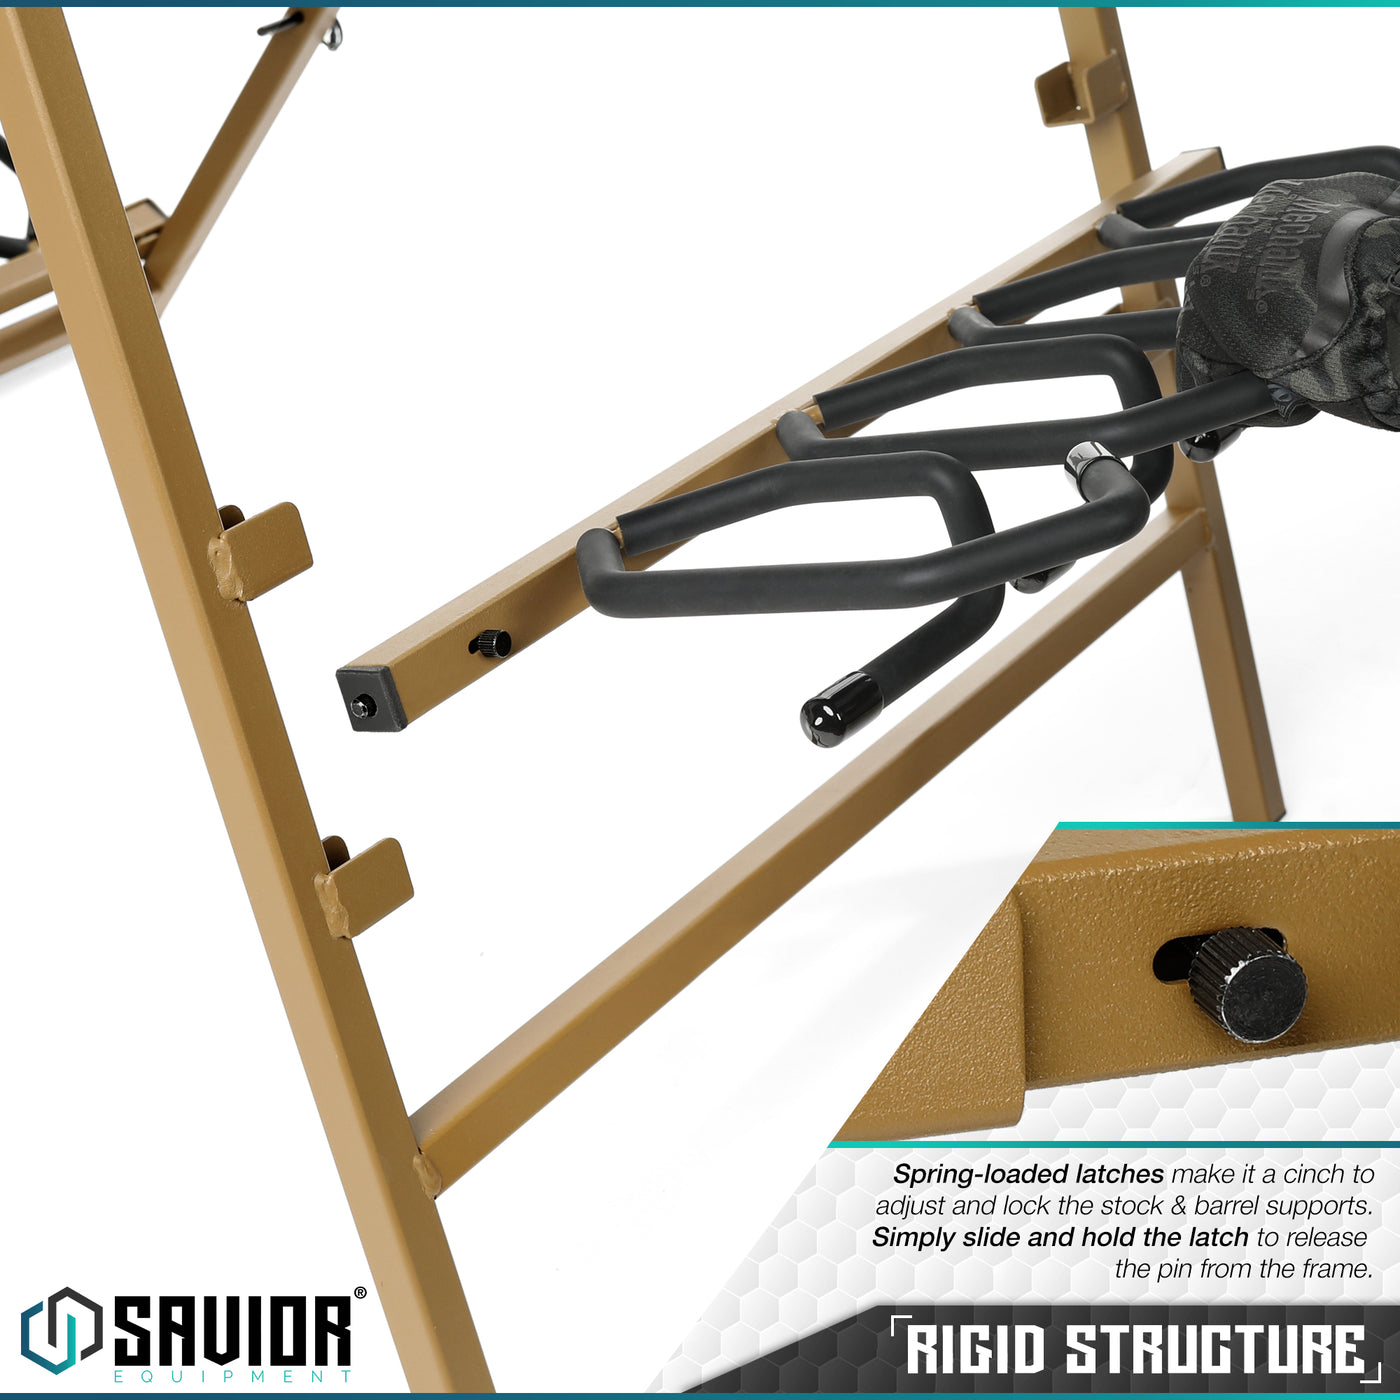 Rigid Structure - Spring-loaded latches make it a cinch to adjust and lock the supports. Simply slide and hold the latch to lease the pin from the frame.